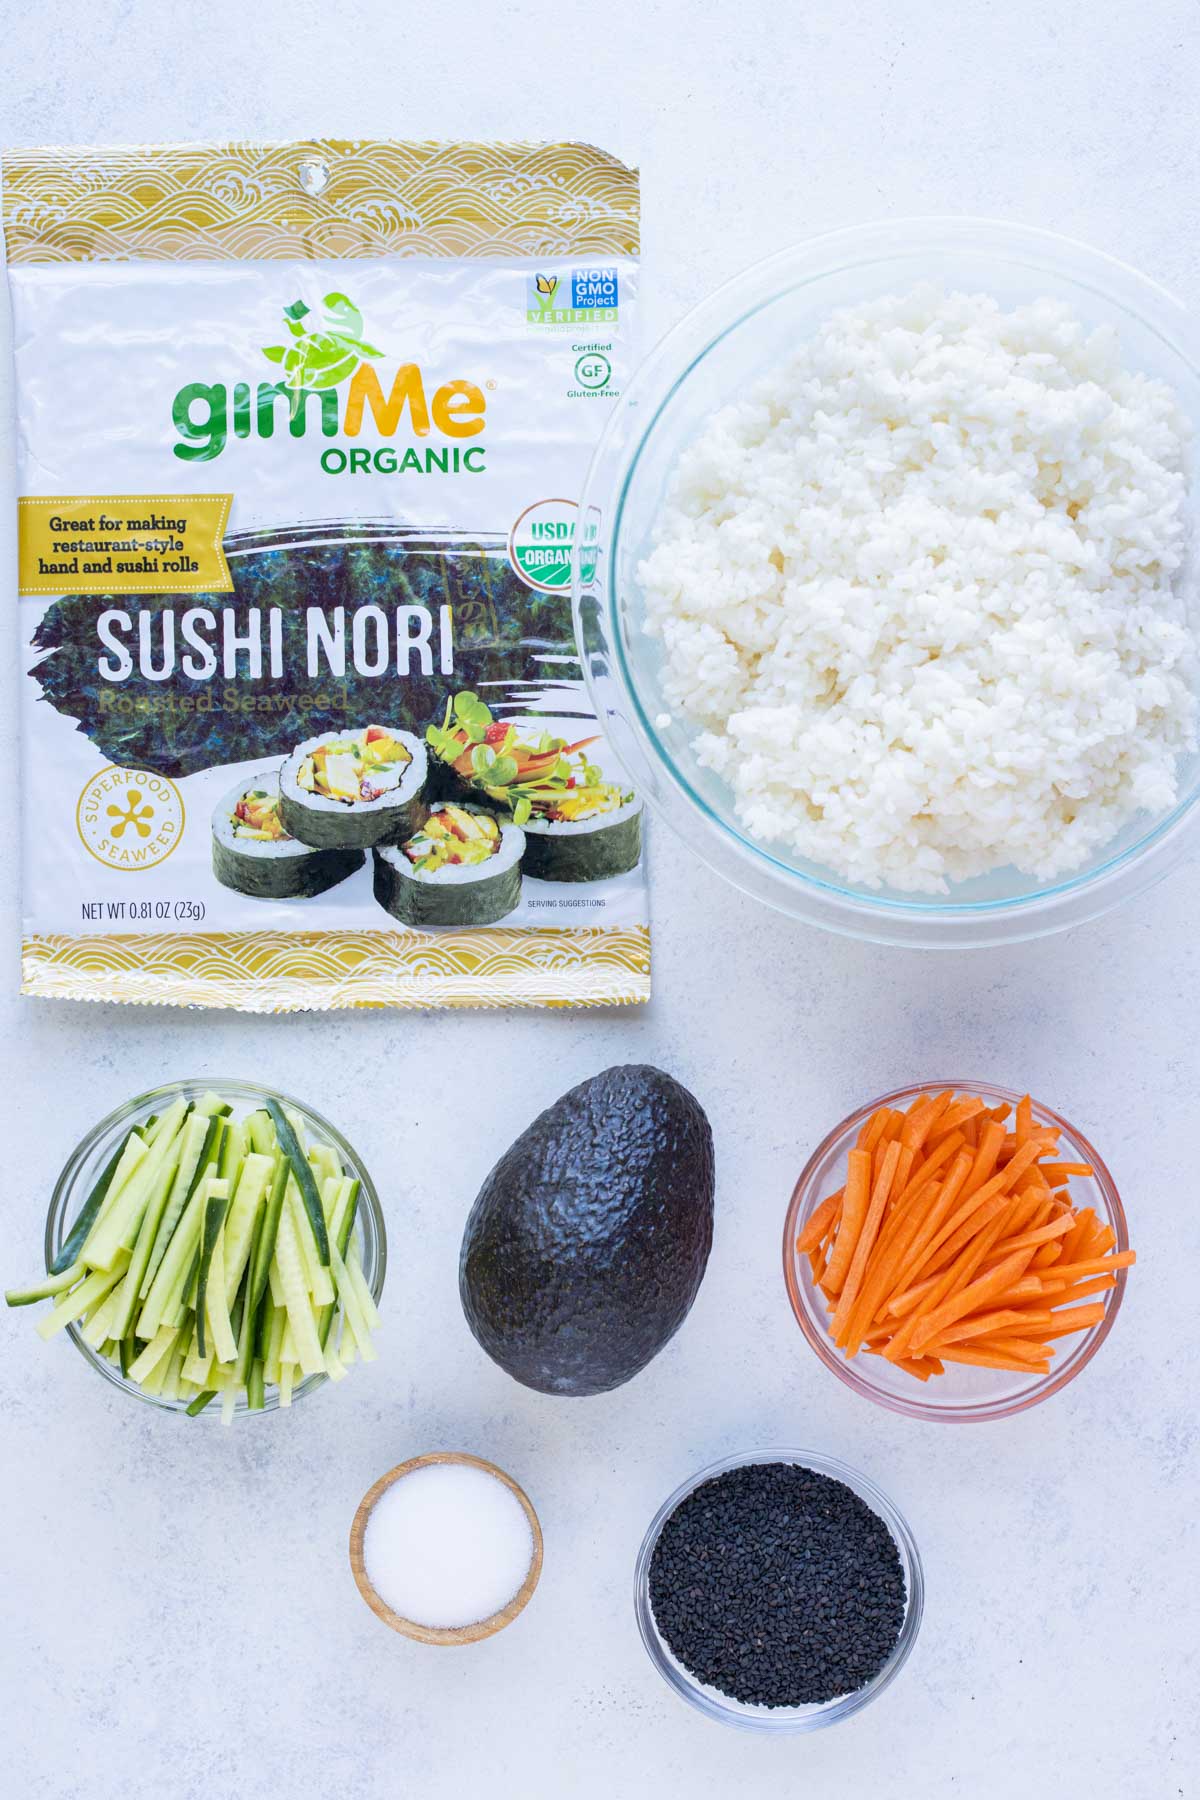 Avocado, rice, carrots, and nori are the ingredients for an avocado roll.